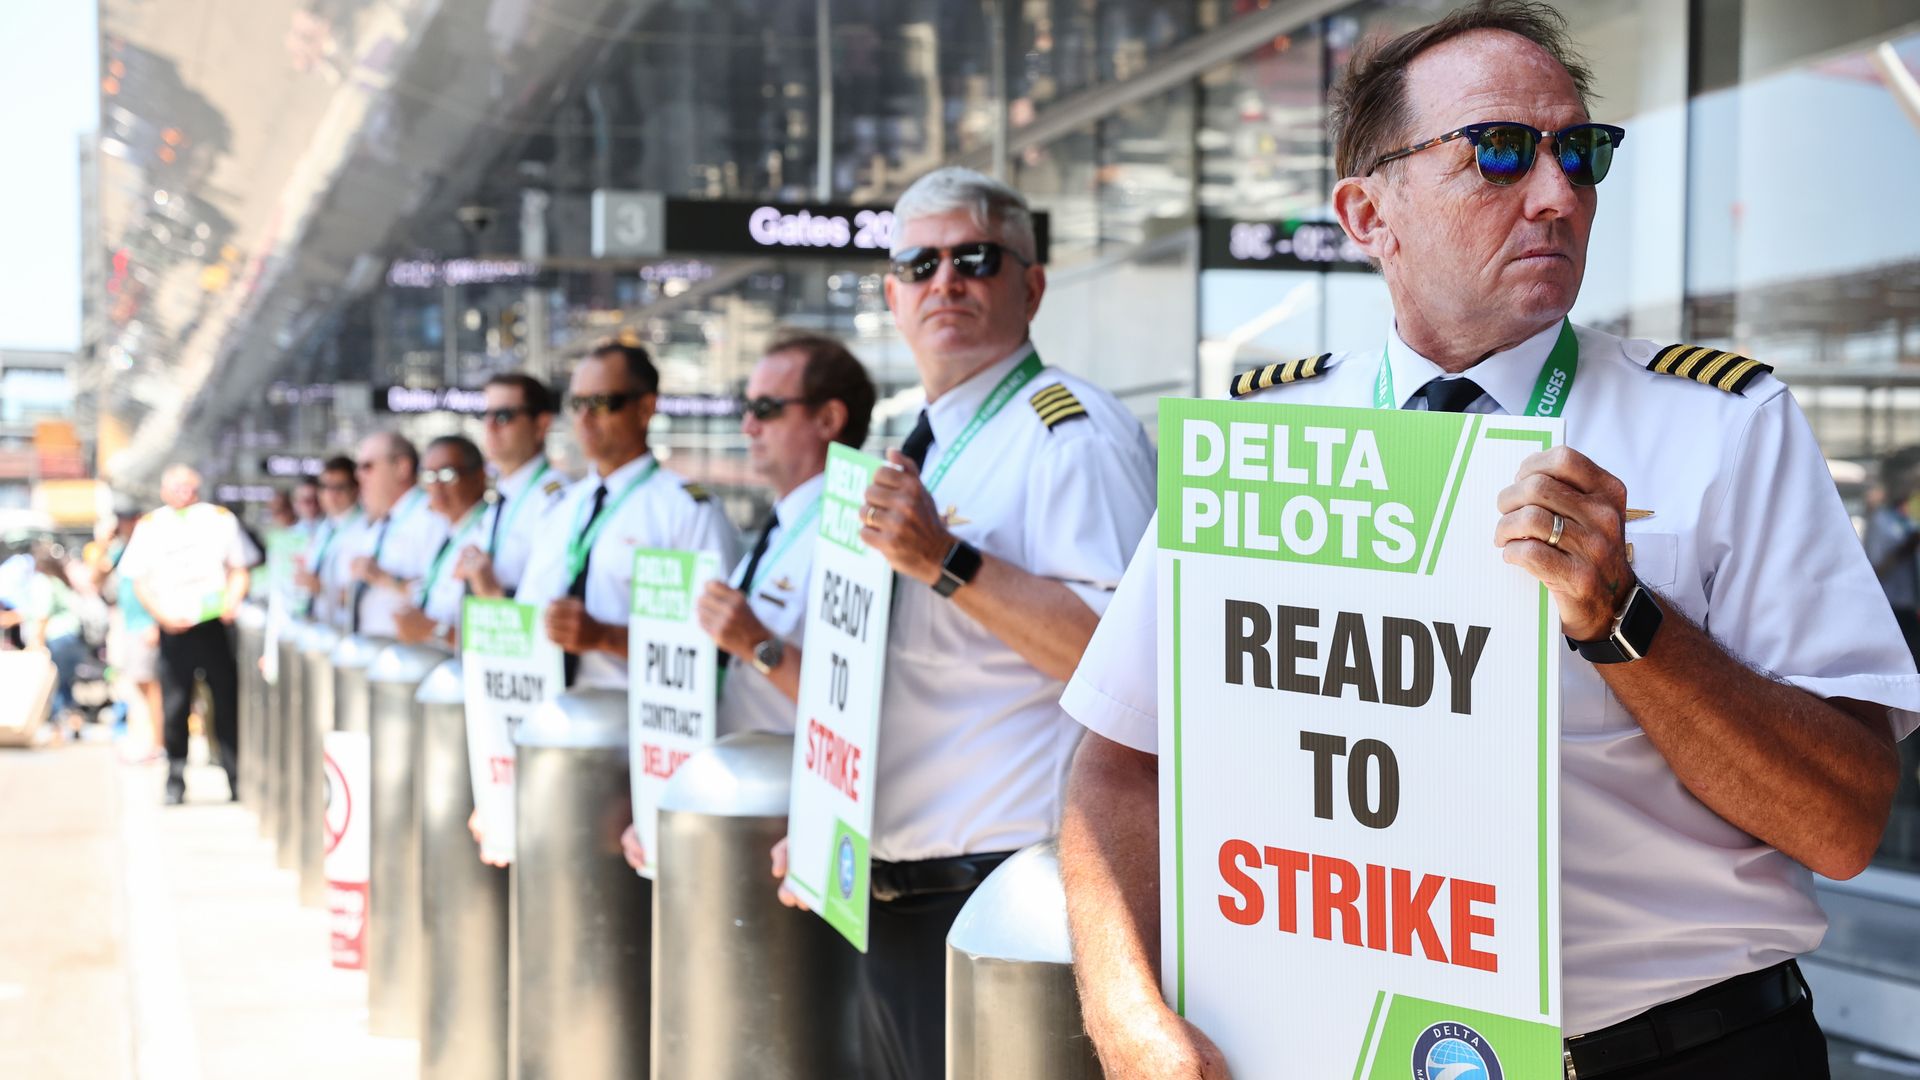 Delta Air Lines pilots picket at Los Angeles International Airport (LAX) during a protest over the union contract on June 30, 2022 in Los Angeles, California. 